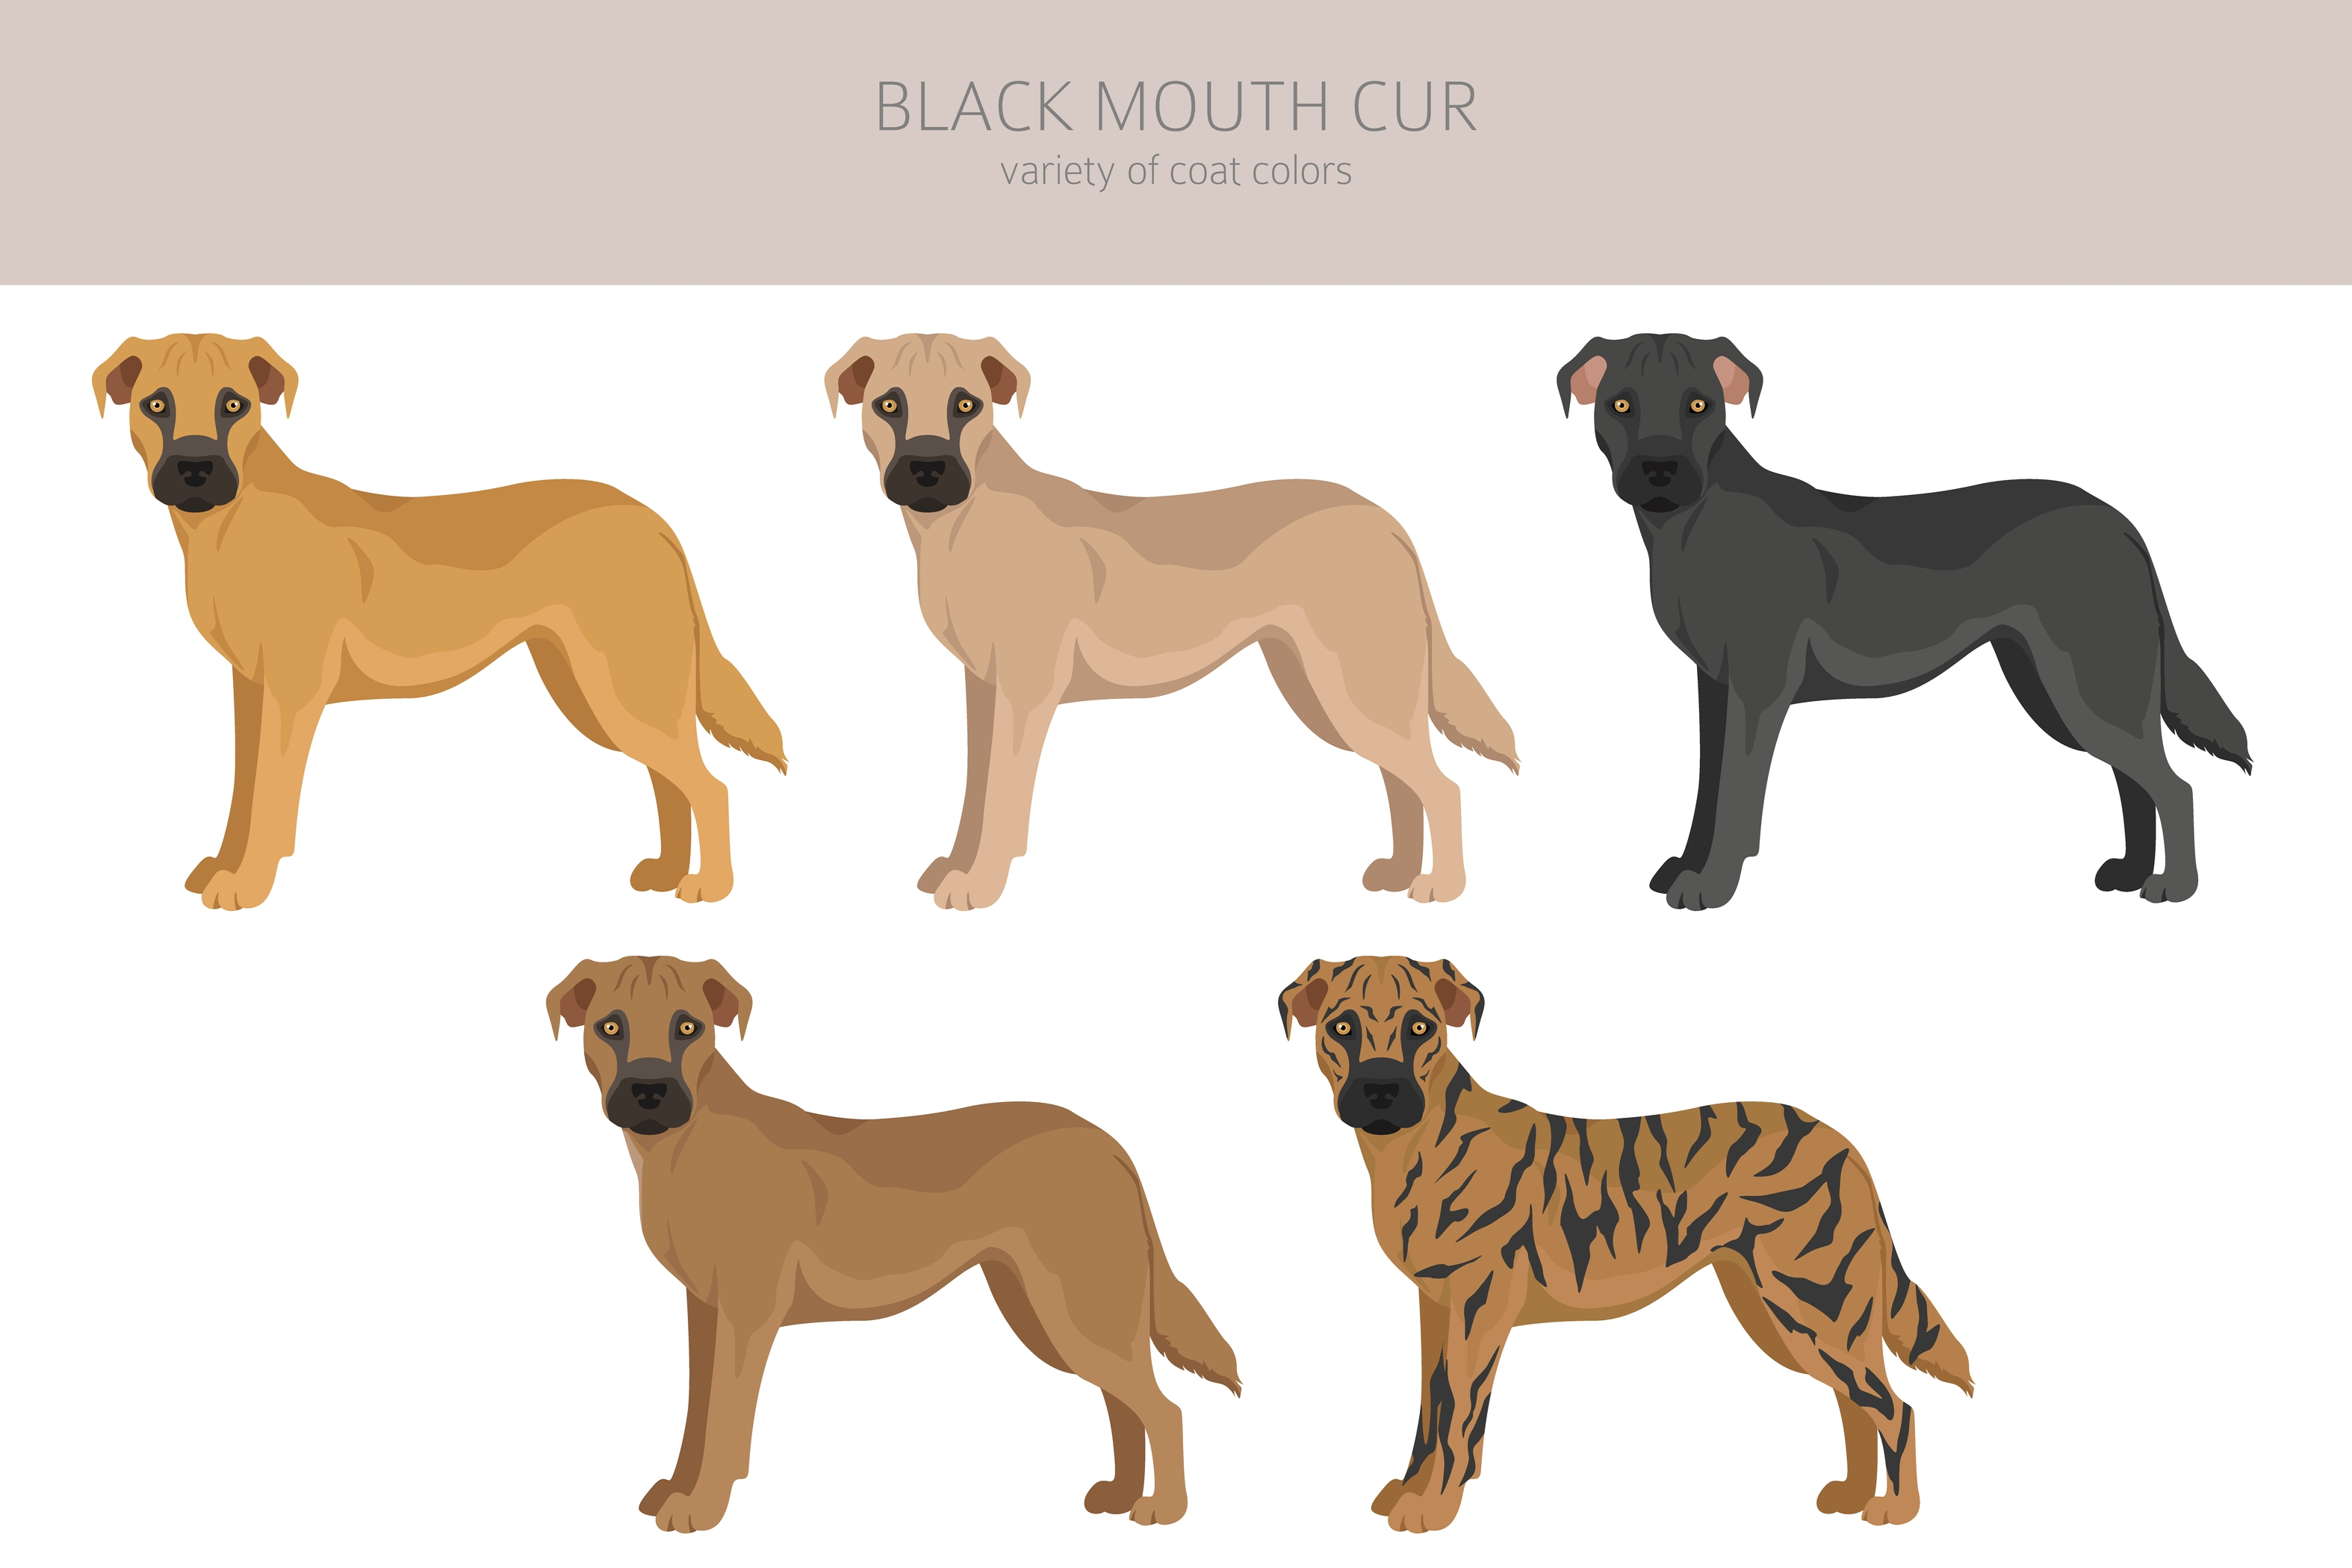 An illustration of the black mouth cur coats